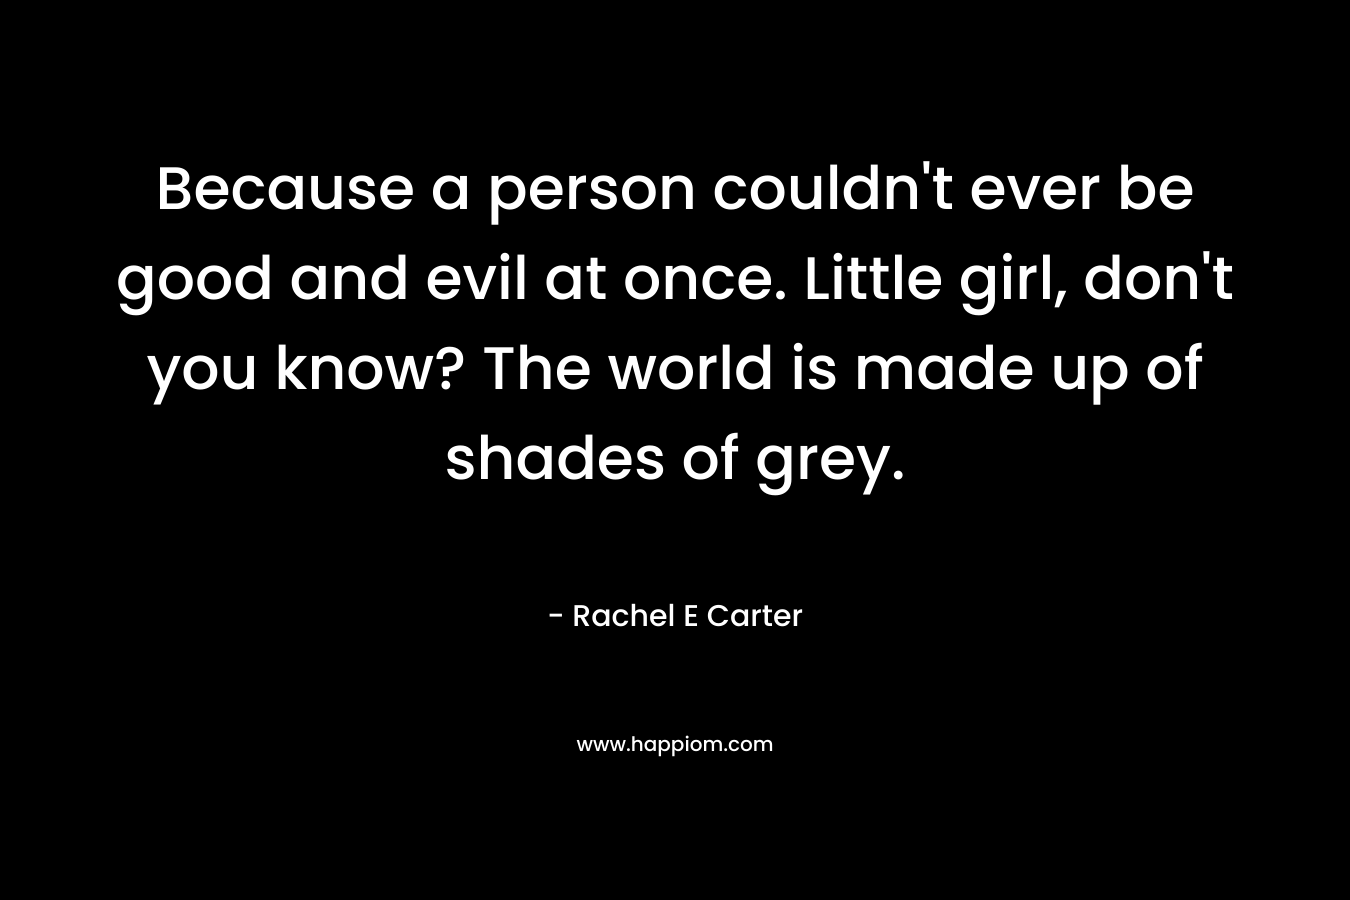 Because a person couldn't ever be good and evil at once. Little girl, don't you know? The world is made up of shades of grey.